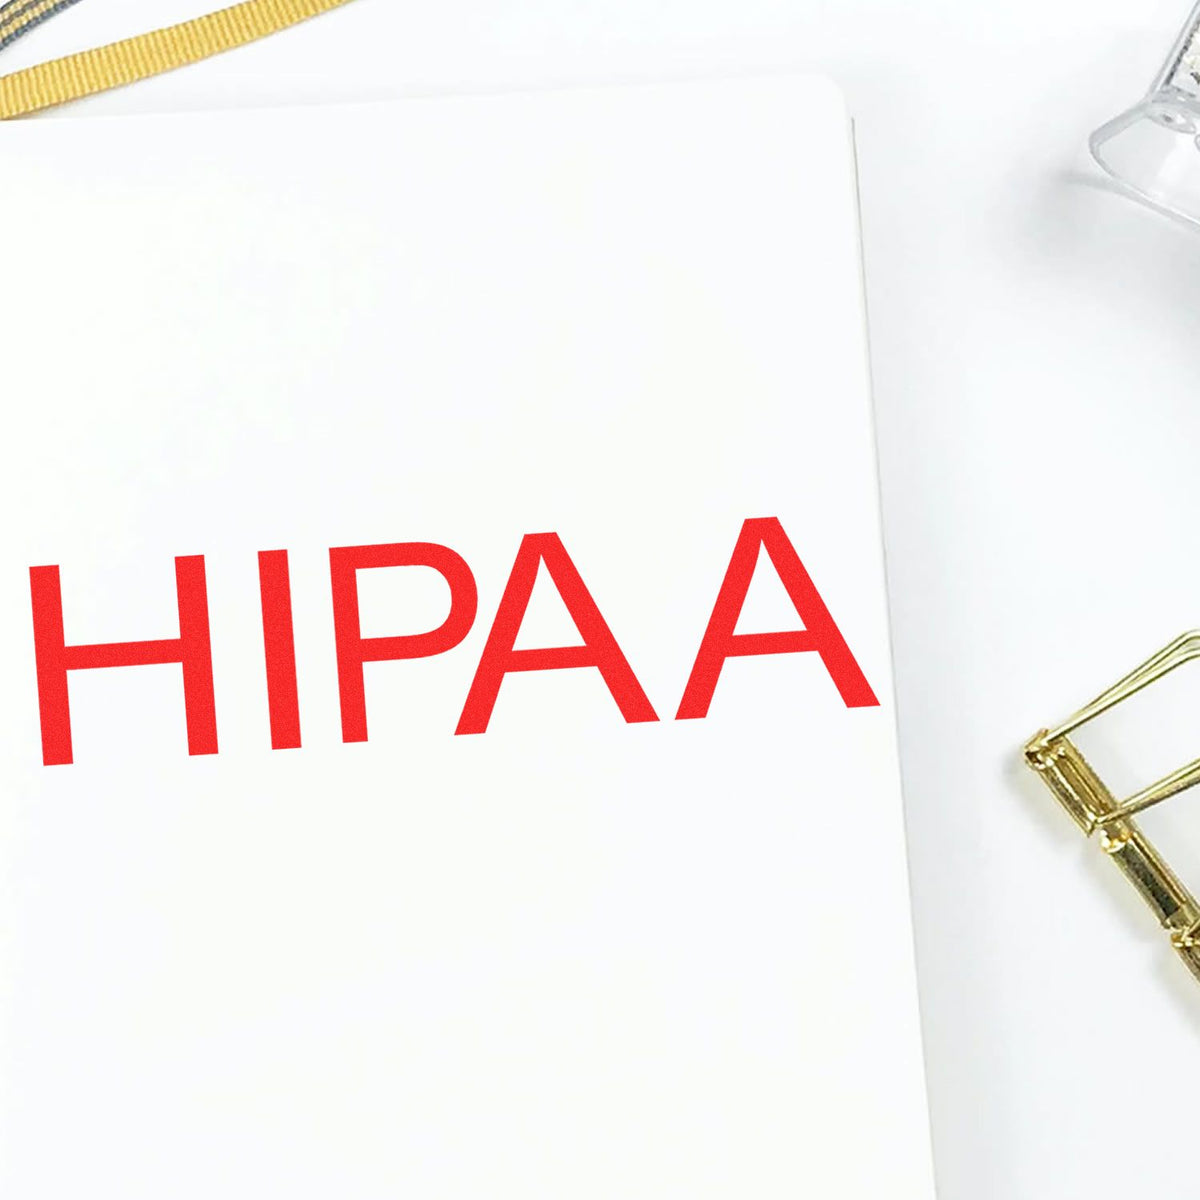 Hipaa Medical Rubber Stamp In Use Photo